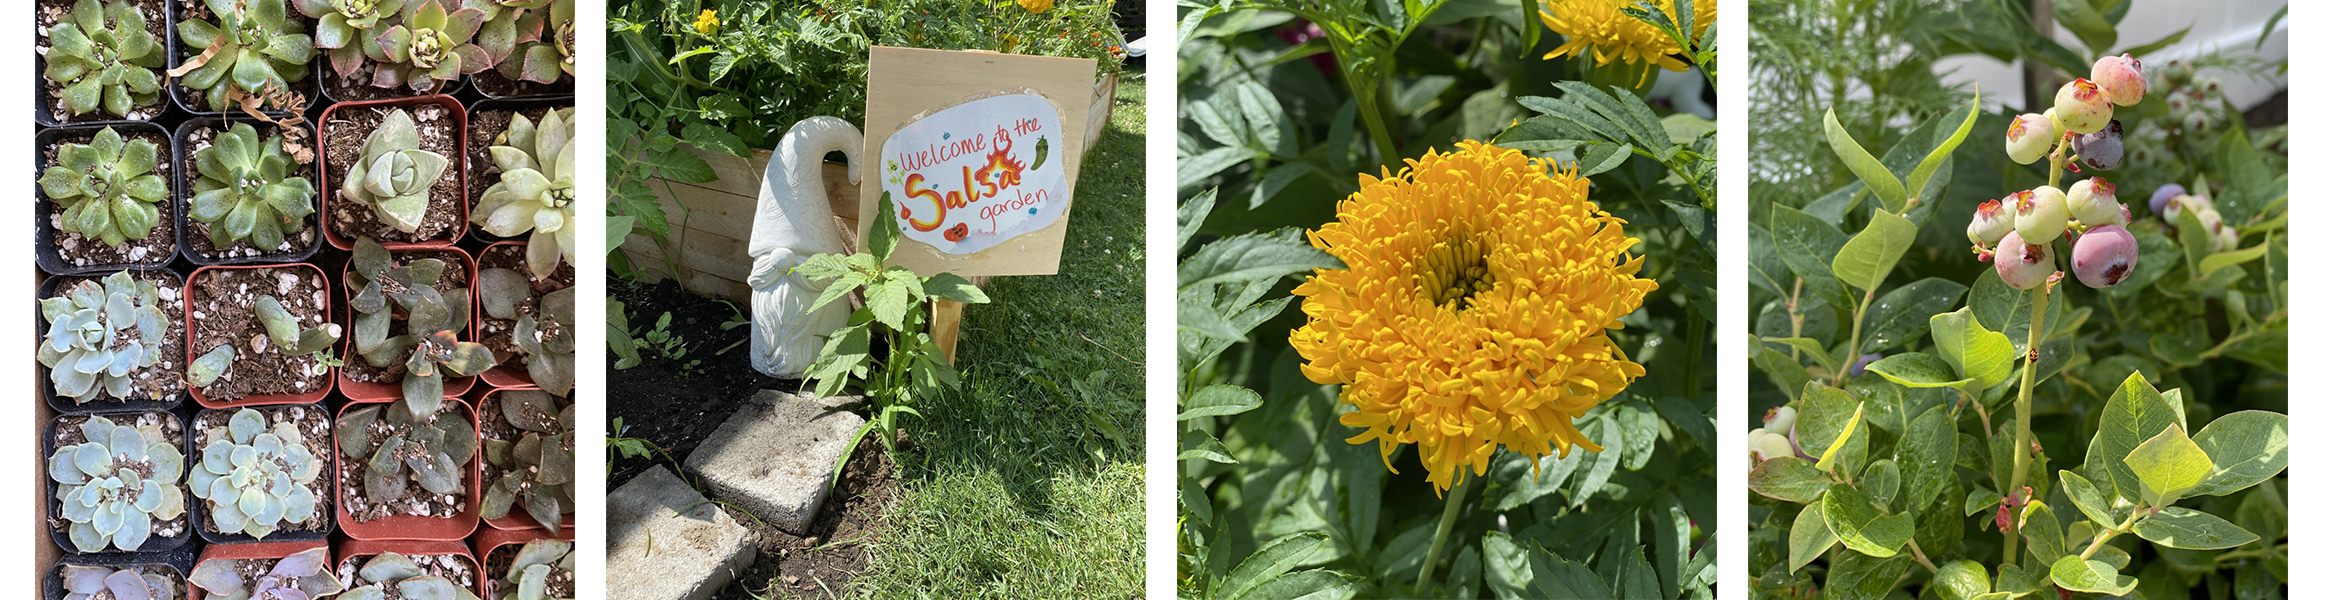 Photos from the CFFS garden including blueberries, a salsa sign, succulents and a flower